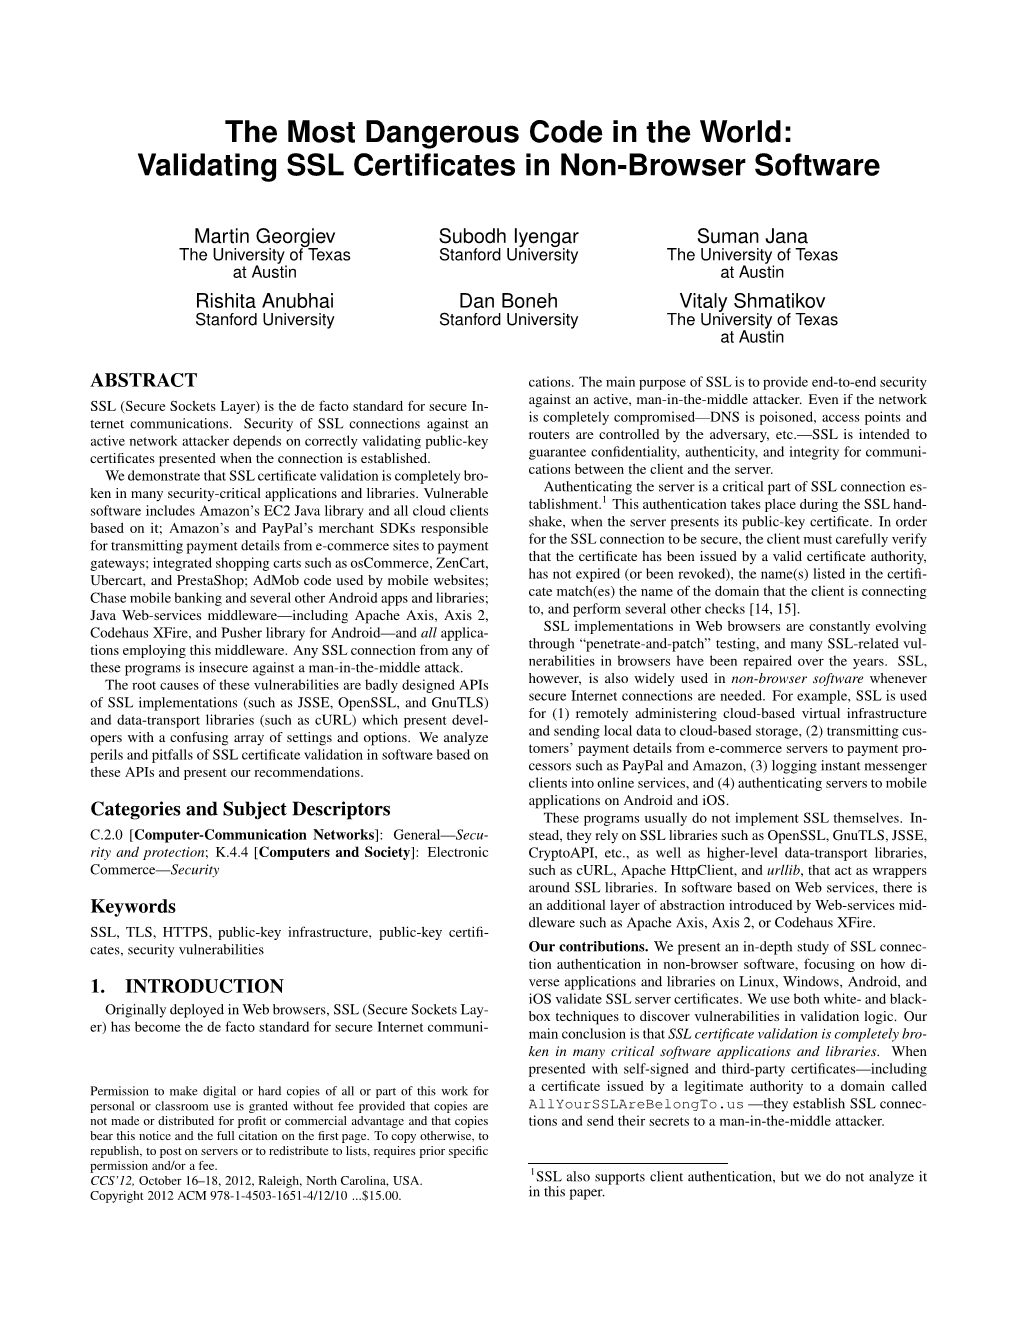 The Most Dangerous Code in the World: Validating SSL Certificates In